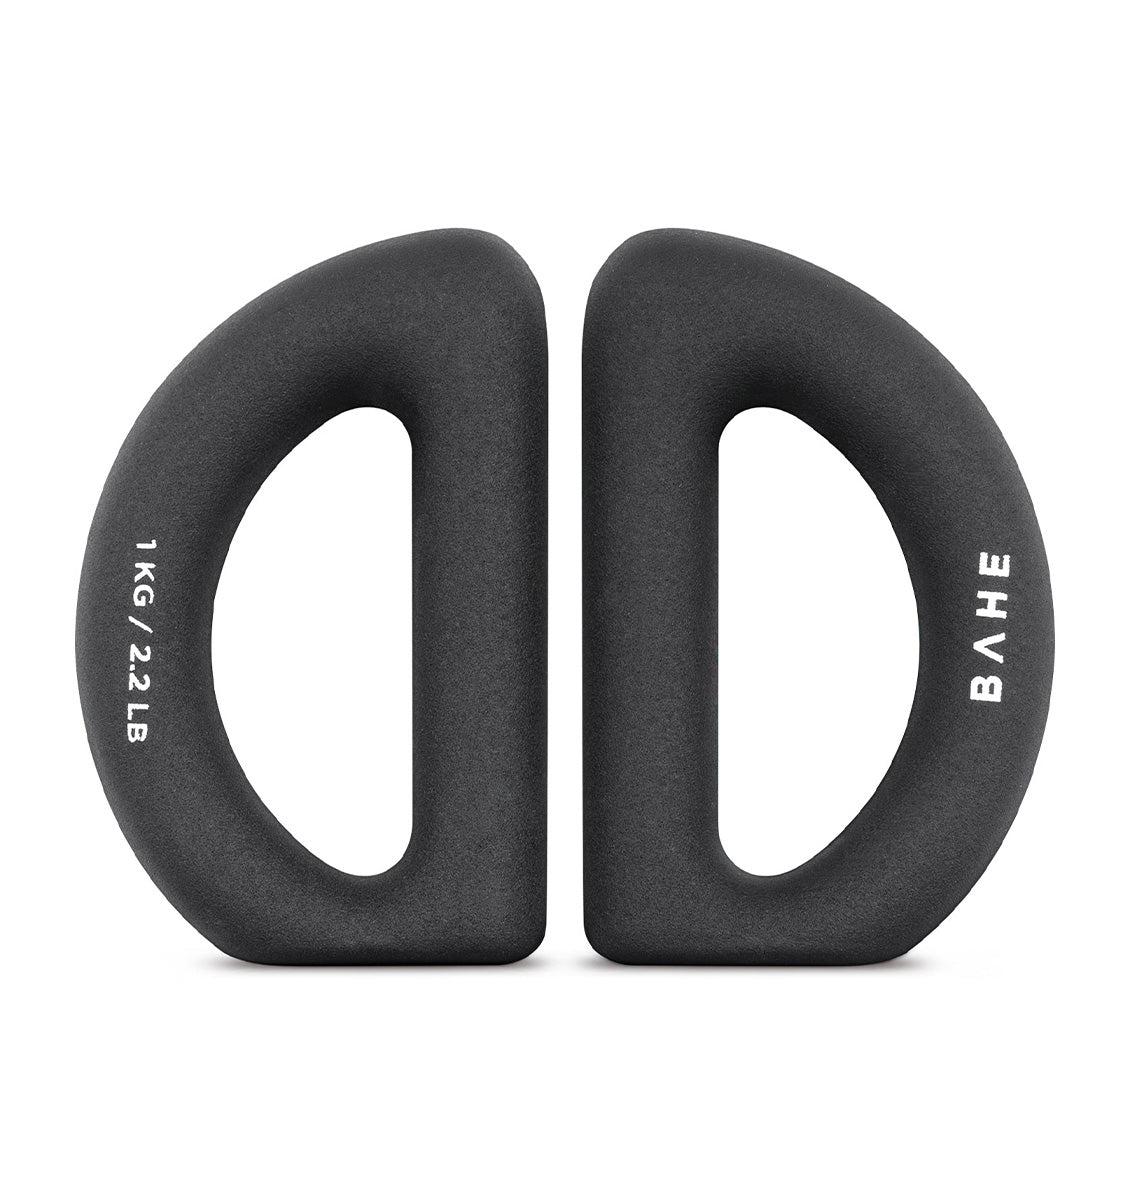 BAHE Halo Weight - 1kg - Pair - Anthracite - 1